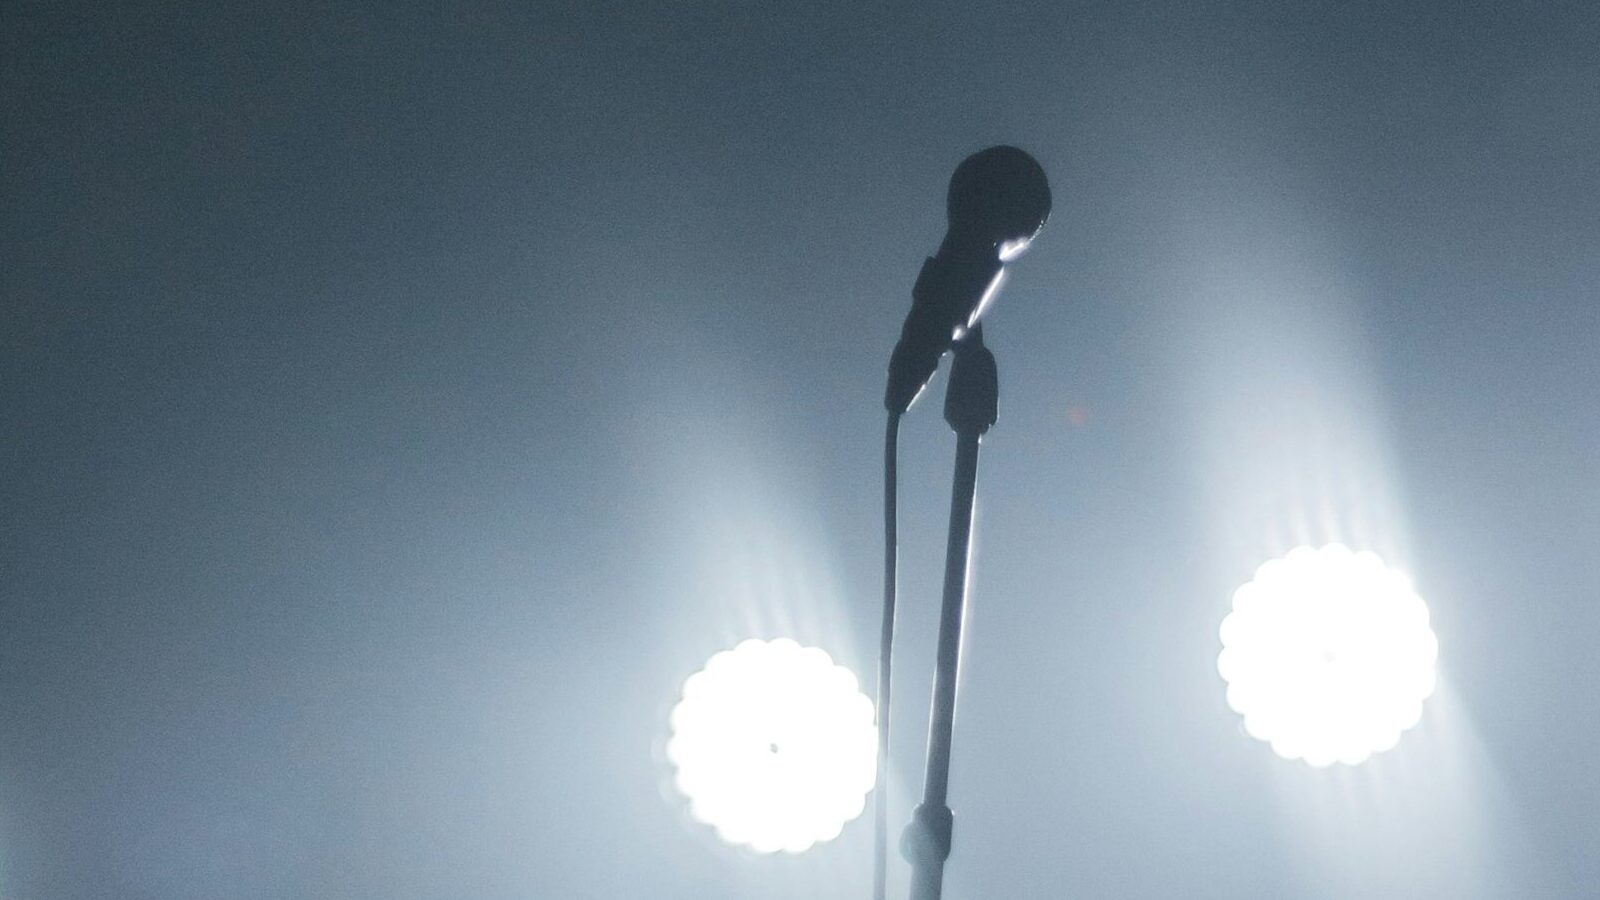 Image shows a microphone under stage lights [Touring]